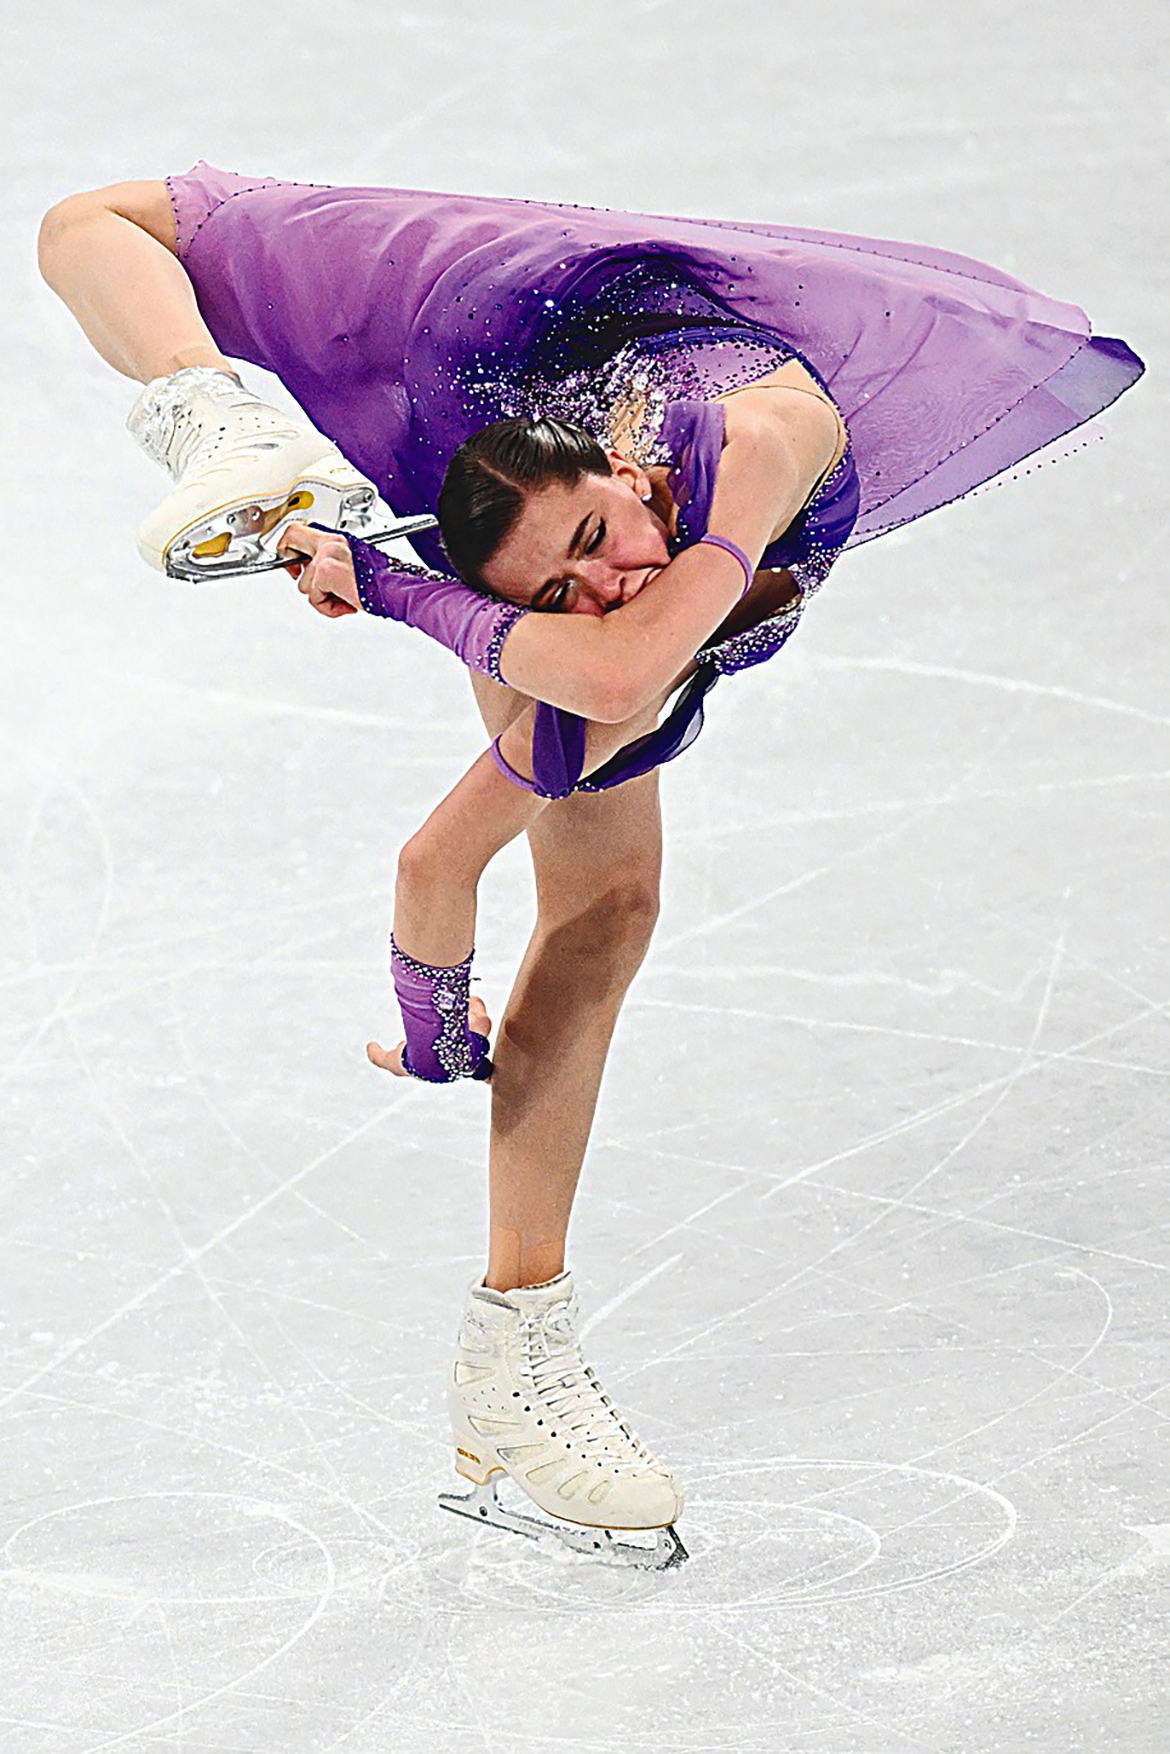 BEIJING: Russia's Kamila Valieva competes in the women's single skating short program of the figure skating event during the Beijing 2022 Winter Olympic Games yesterday. - AFP